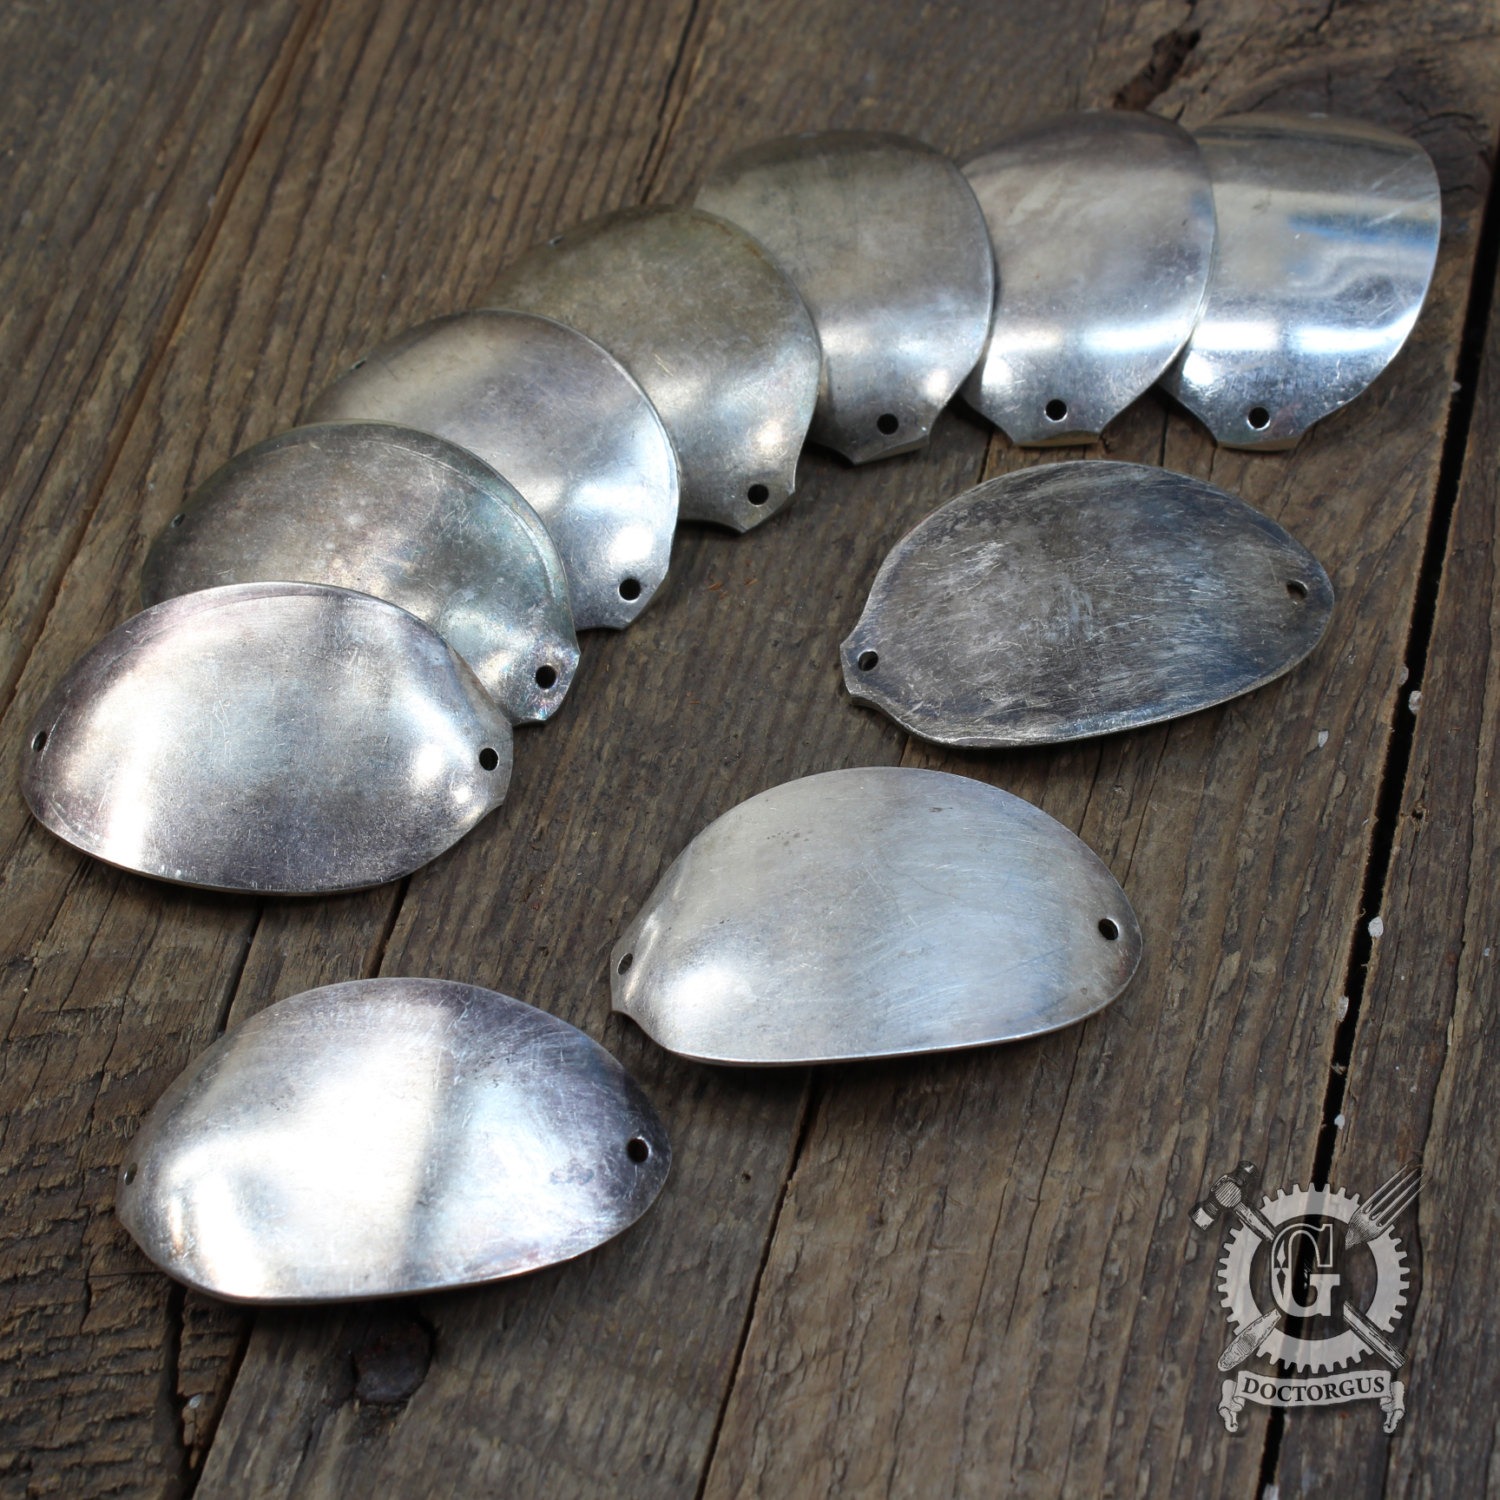 Curved Spoon Bracelet Parts - 10 Piece Assortment - Antique Sterling Silver Plated Silverware - Make Your Own Spoon Jewelry - Metal Stamping steampunk buy now online